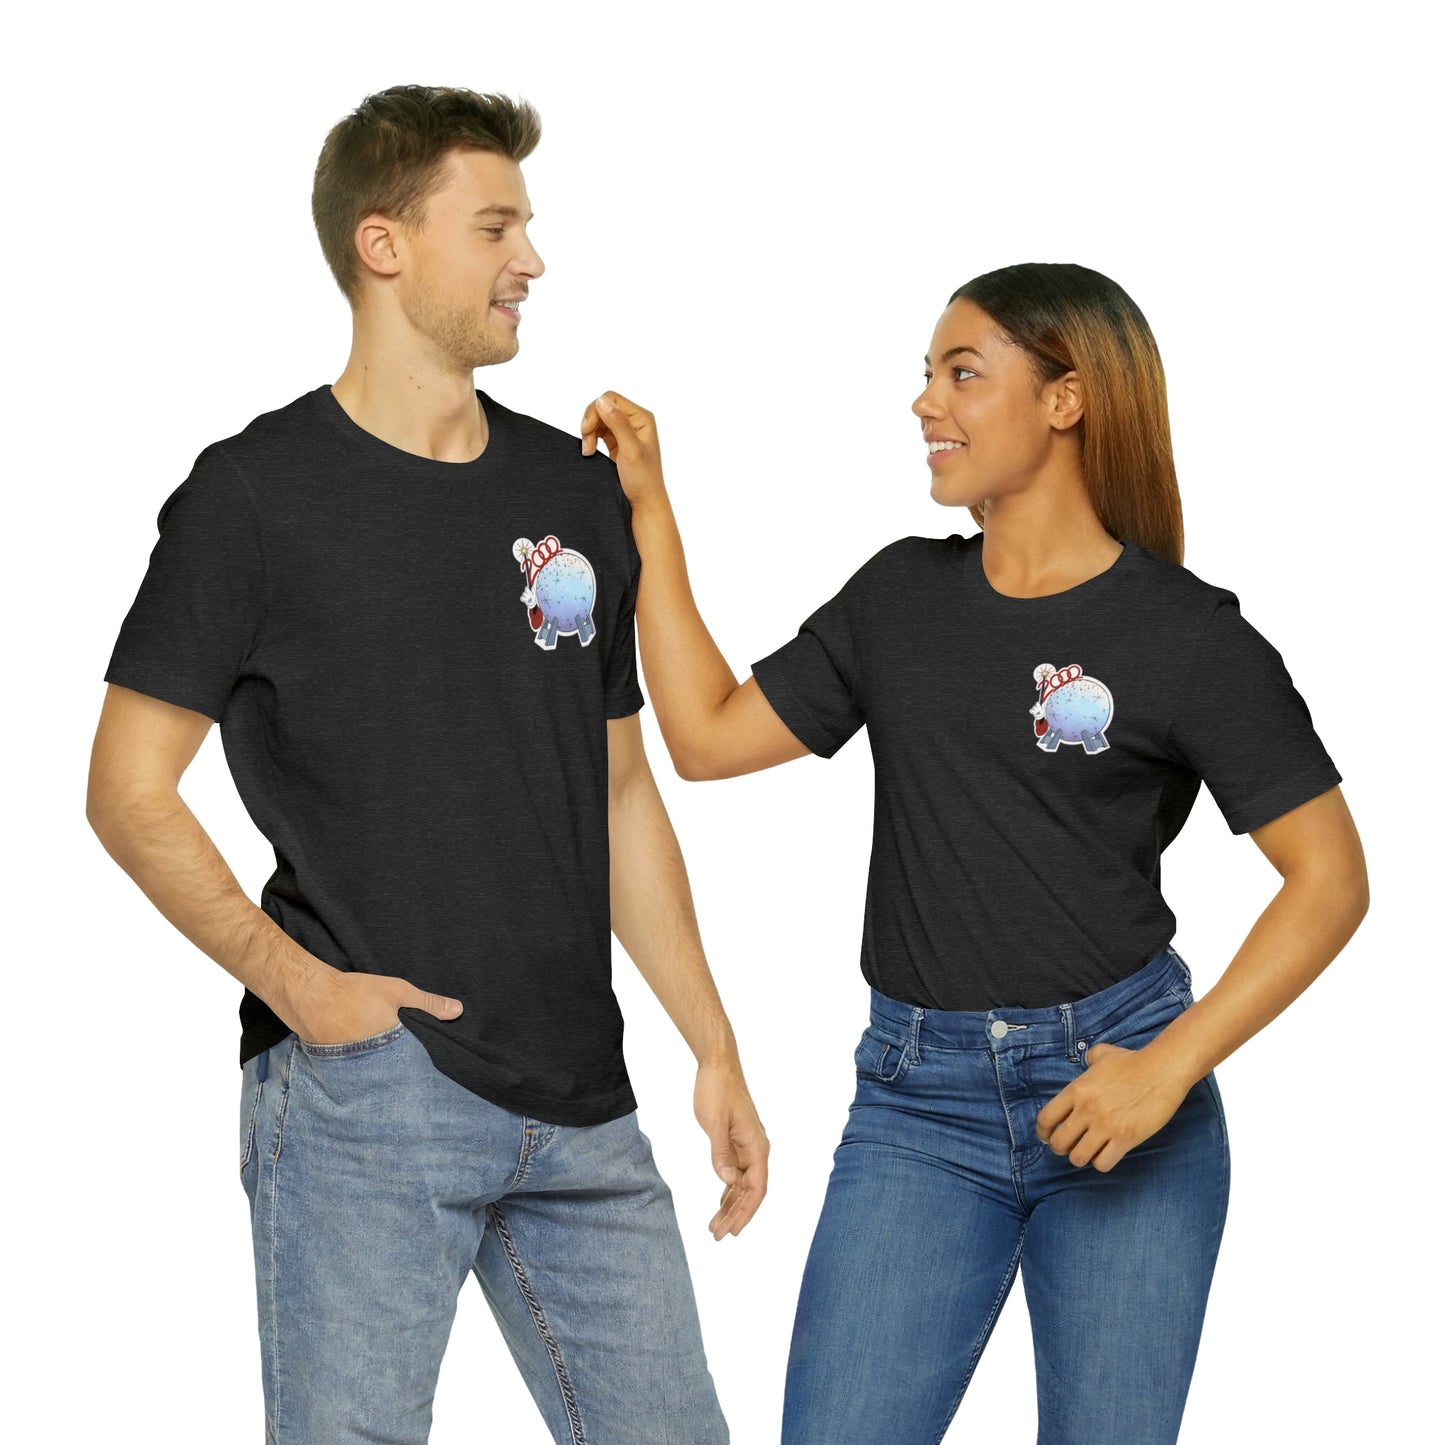 Epcot 2000 Wand corner tees men and Womens fit